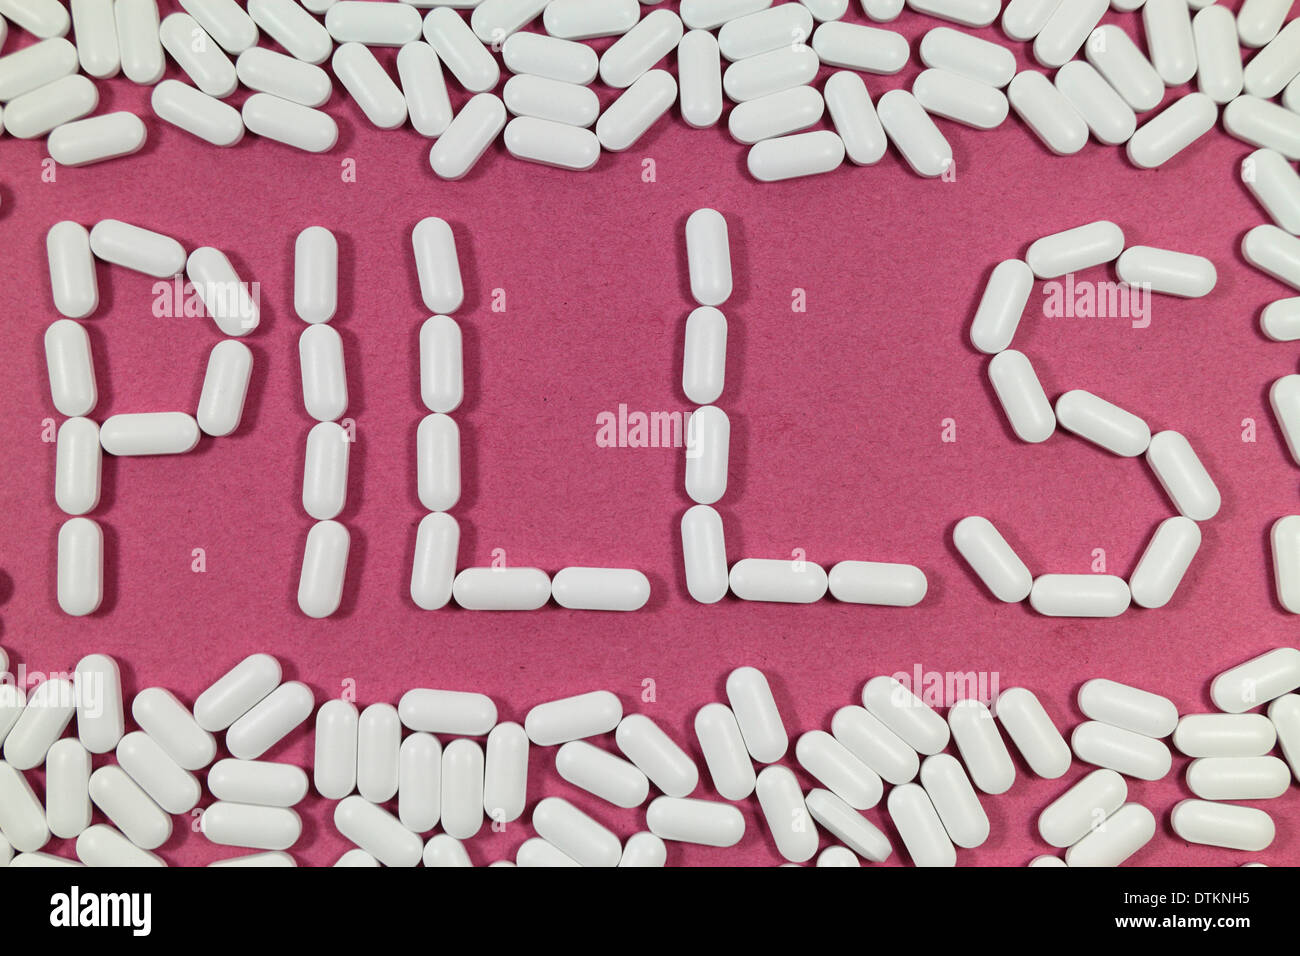 White pills on a red/pinks background spelling 'PILLS'. Stock Photo